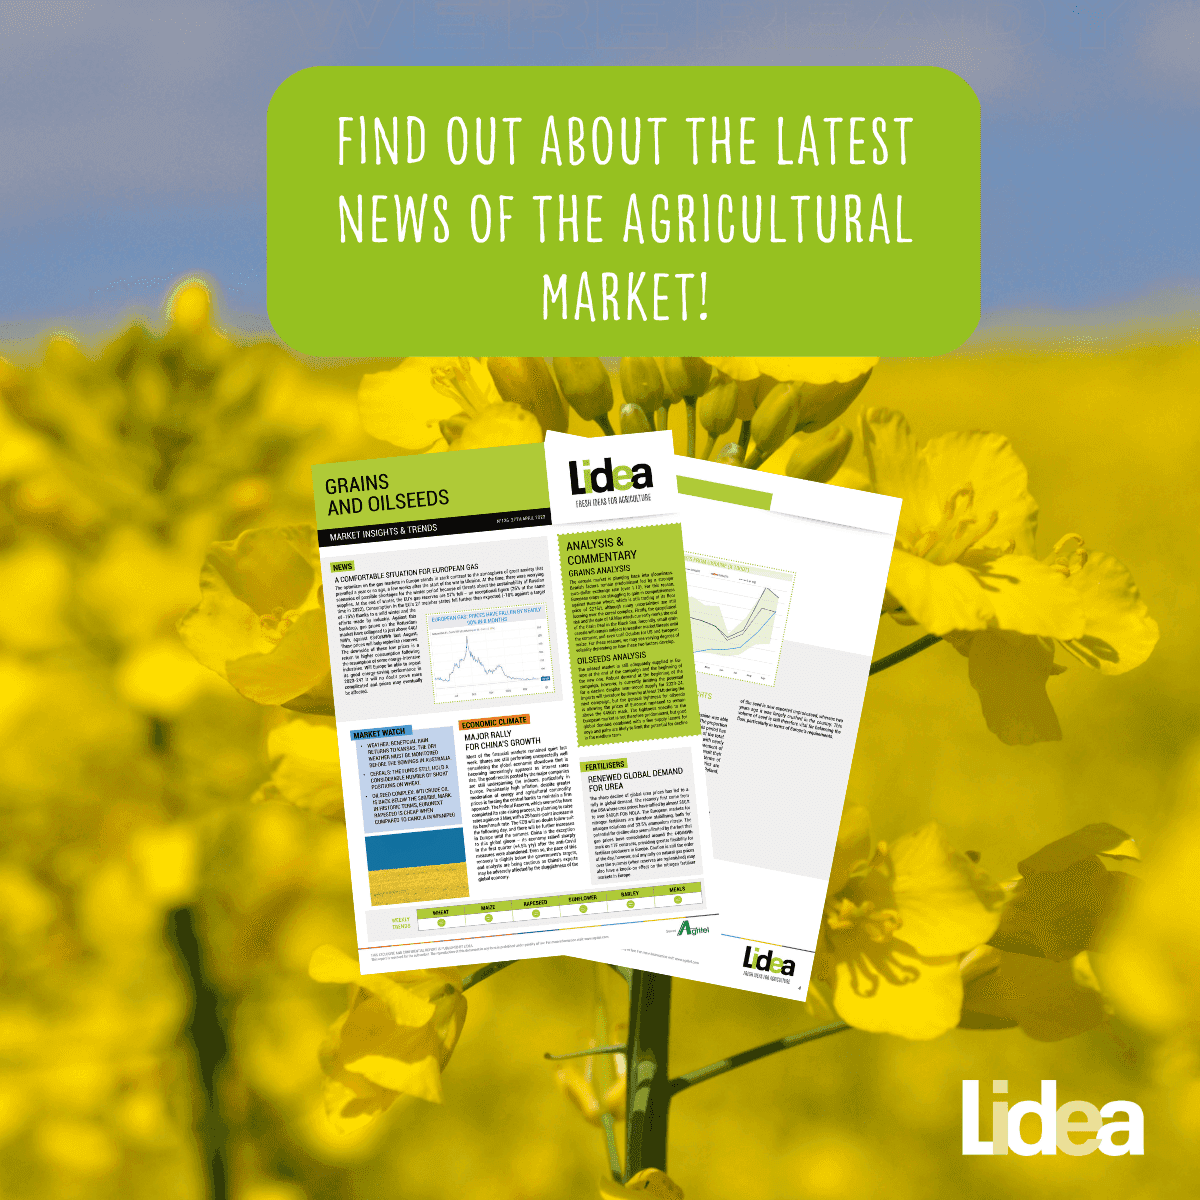 It's time to read about the agricultural market news